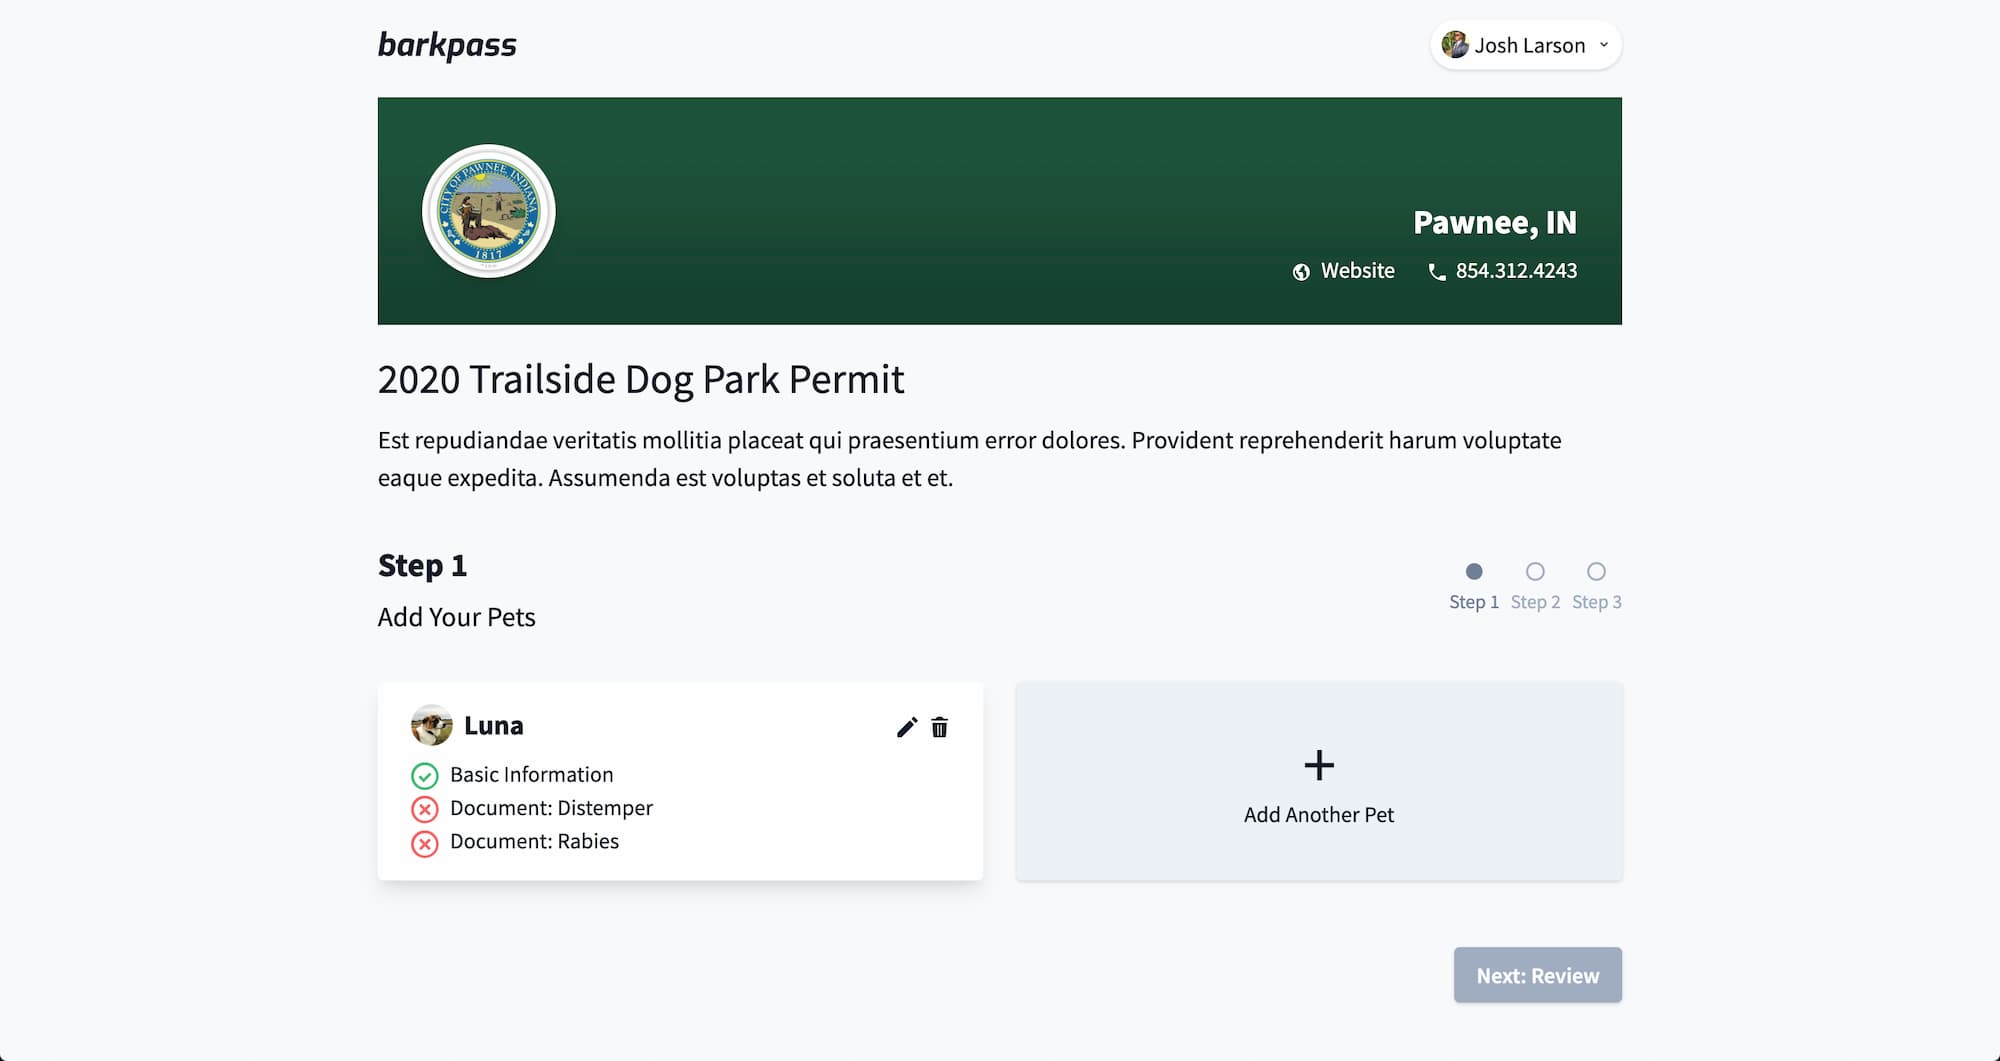 Permit application form in Barkpass